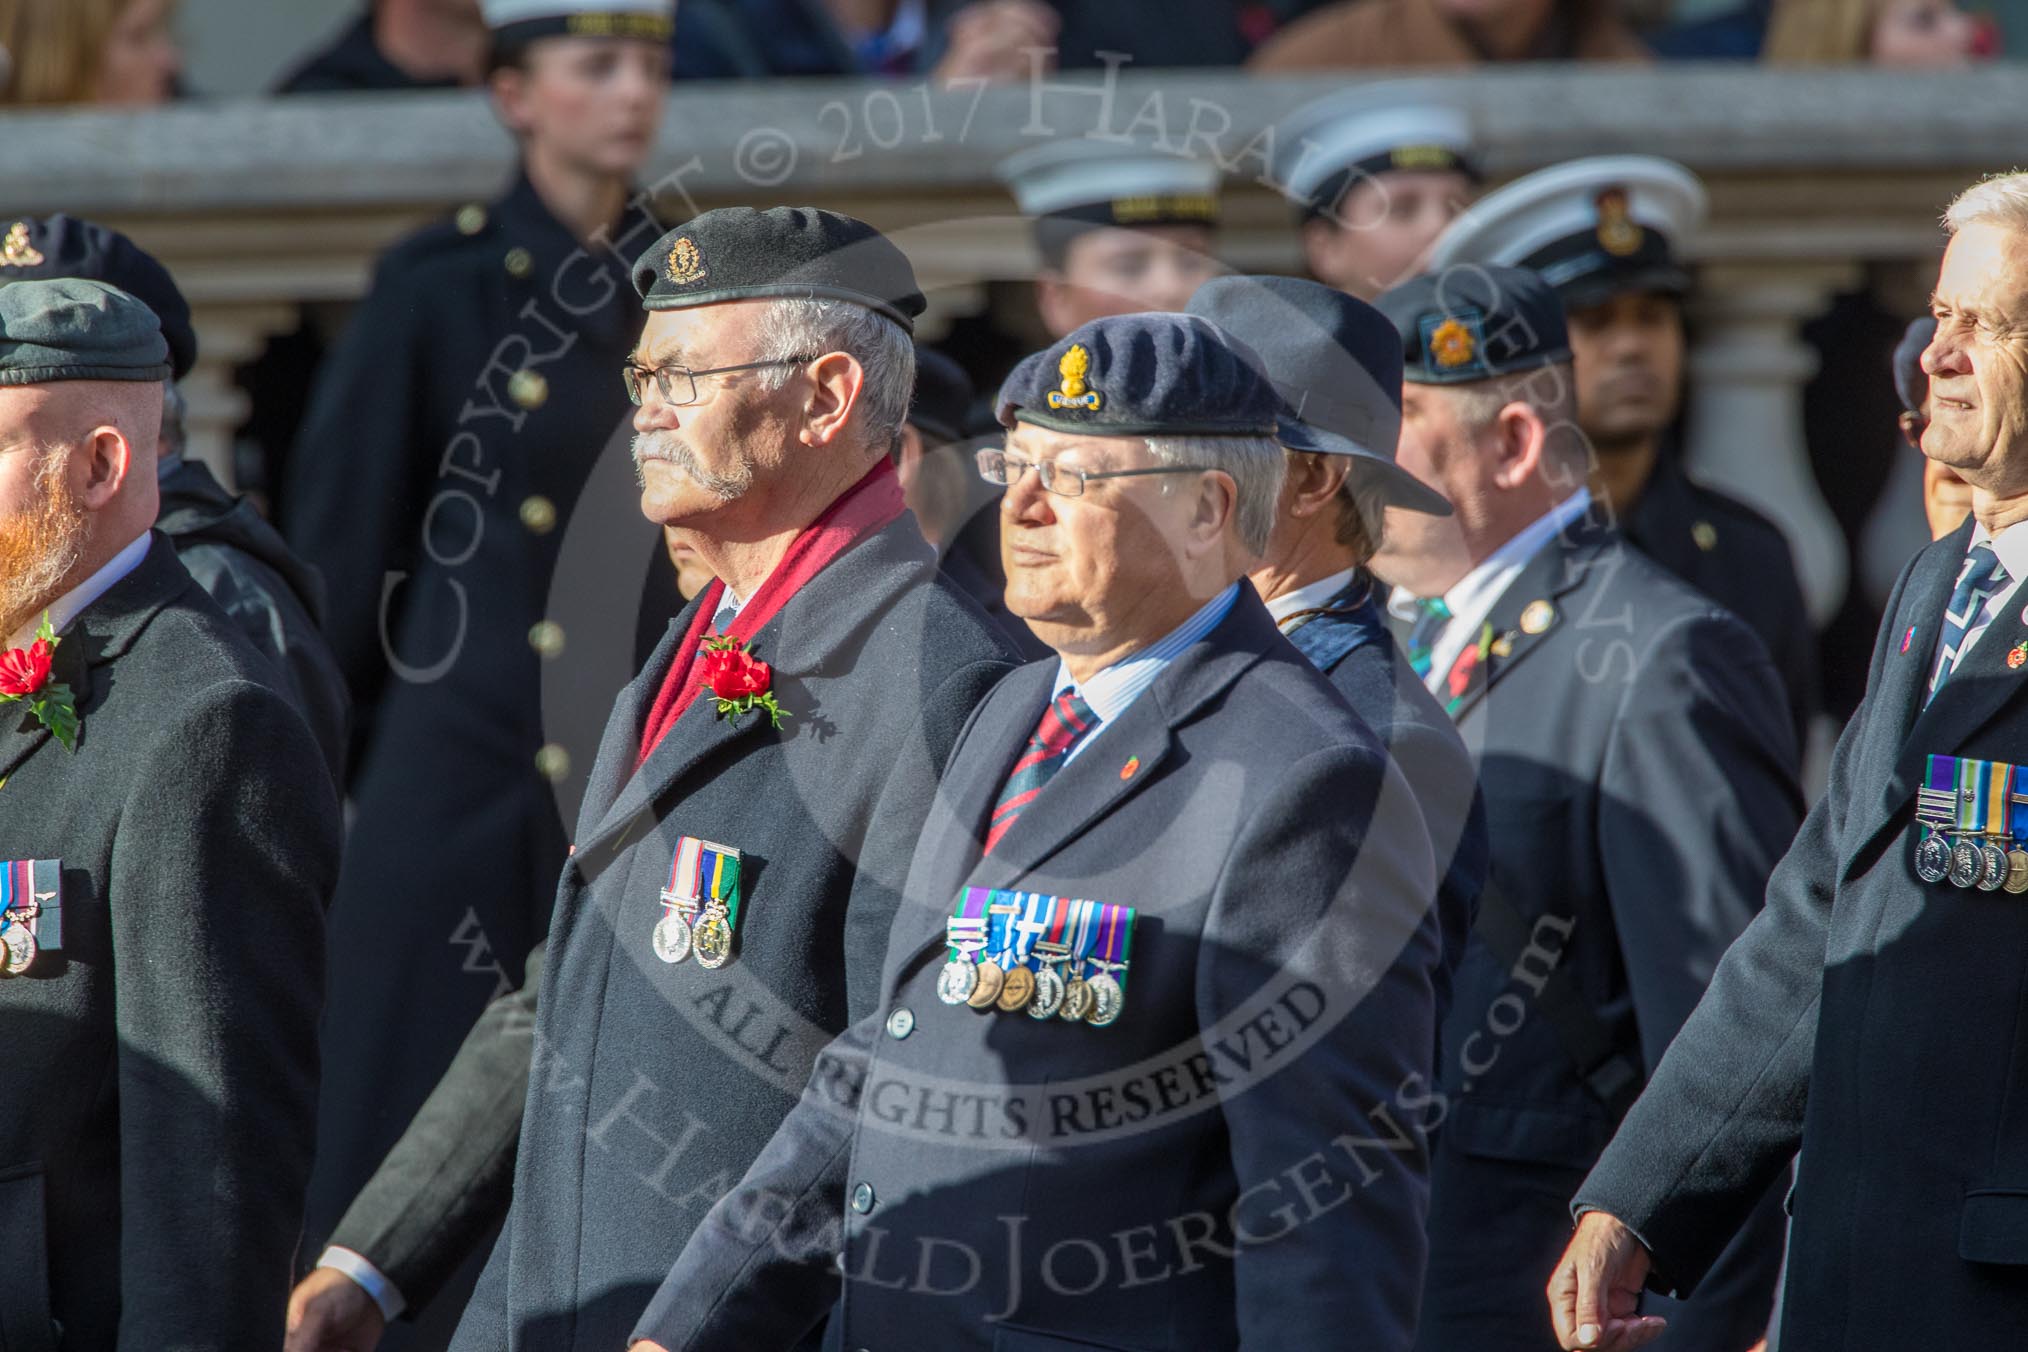 Circuit of Service Lodges (Group D14, 35 members) during the Royal British Legion March Past on Remembrance Sunday at the Cenotaph, Whitehall, Westminster, London, 11 November 2018, 12:22.